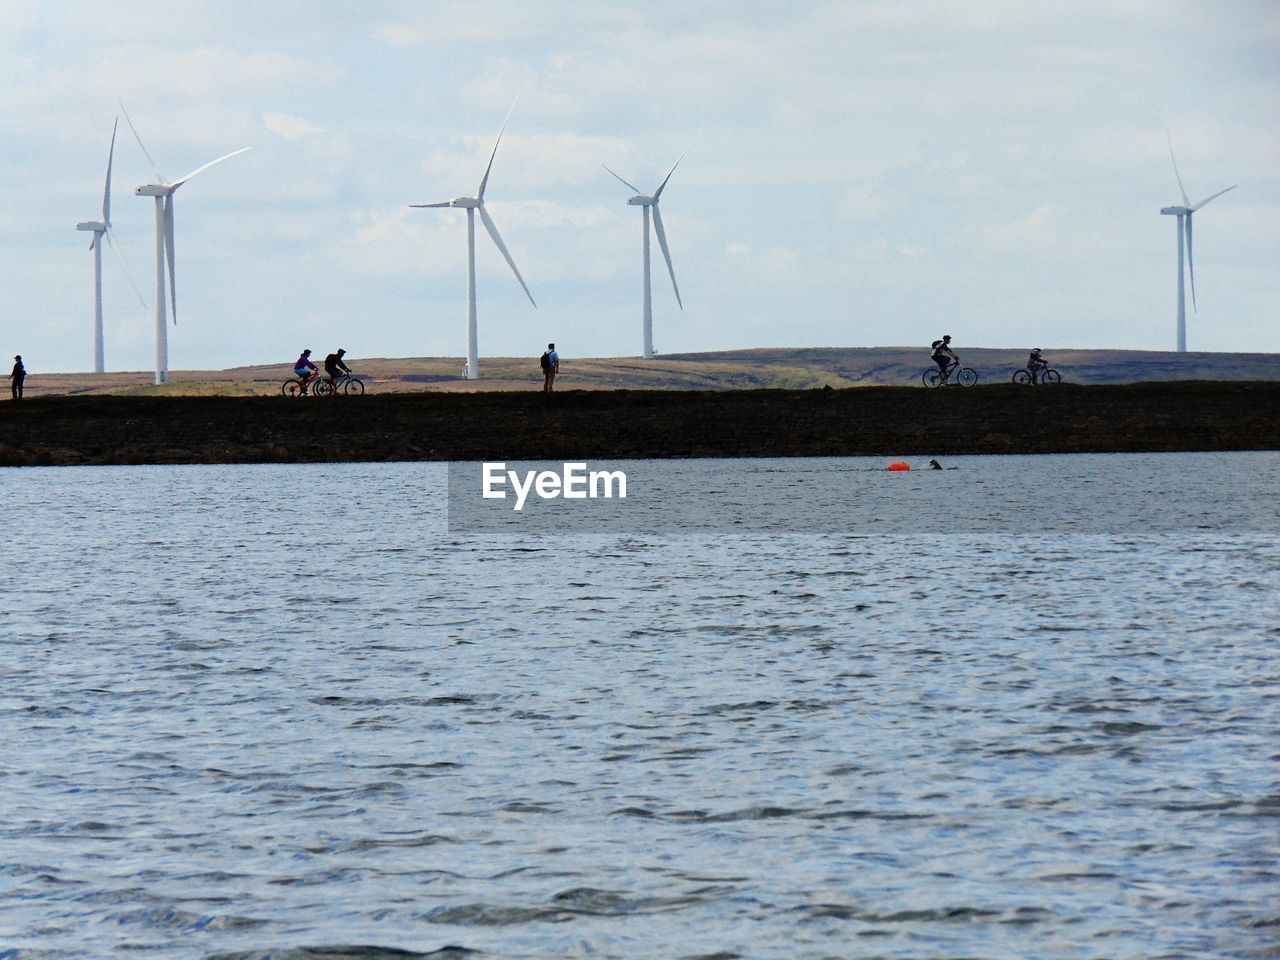 People riding bicycle on riverbank by windmills against sky